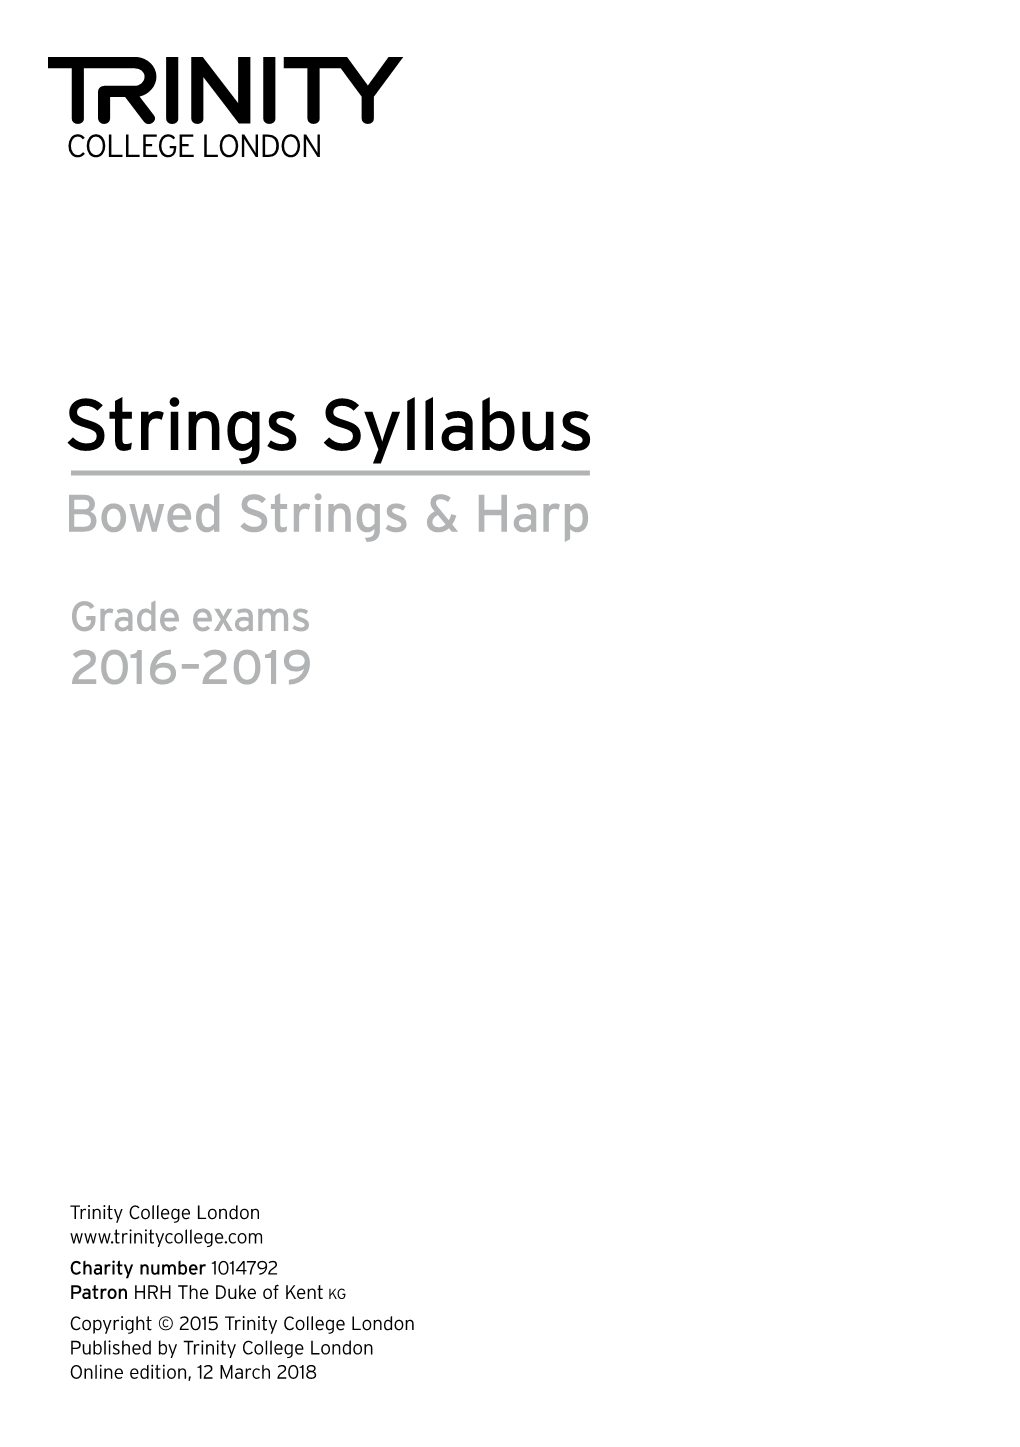 Download the 2016-2019 Strings Syllabus